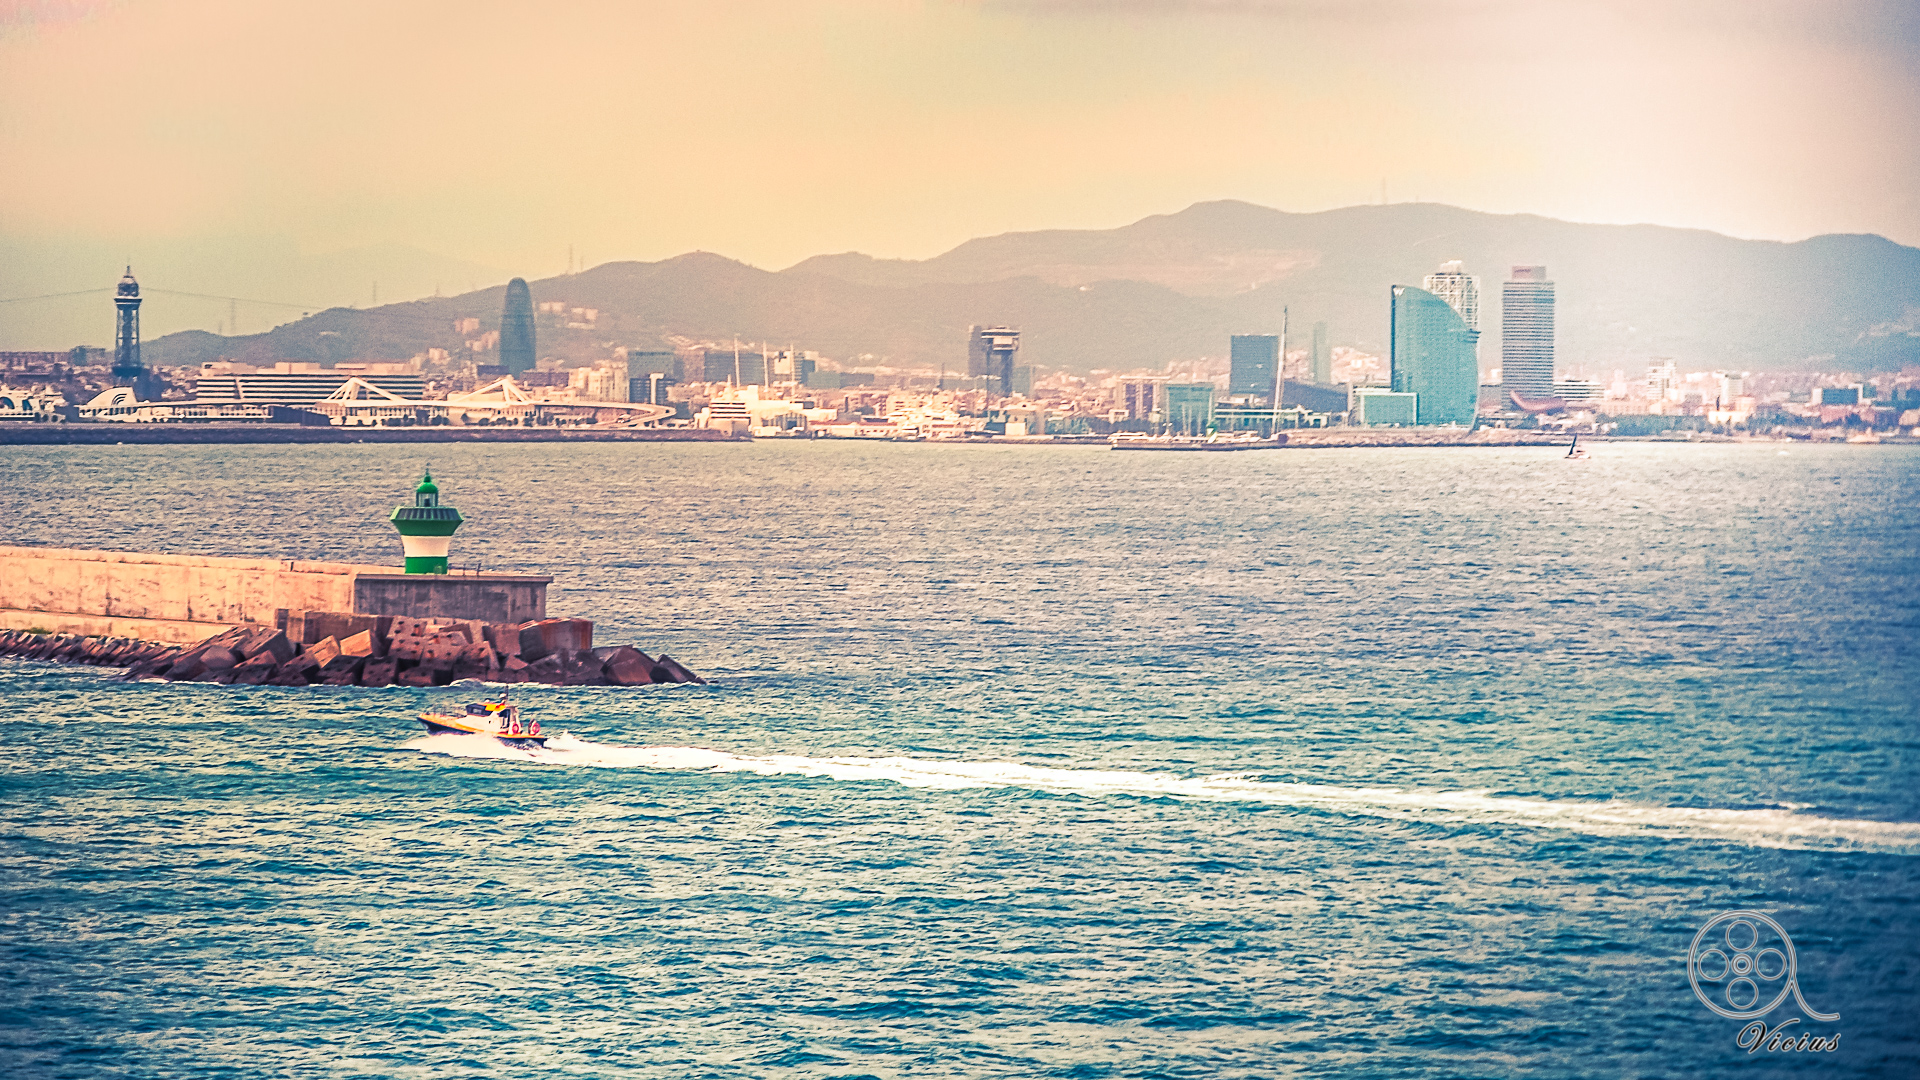 Barcelona seen from the sea...